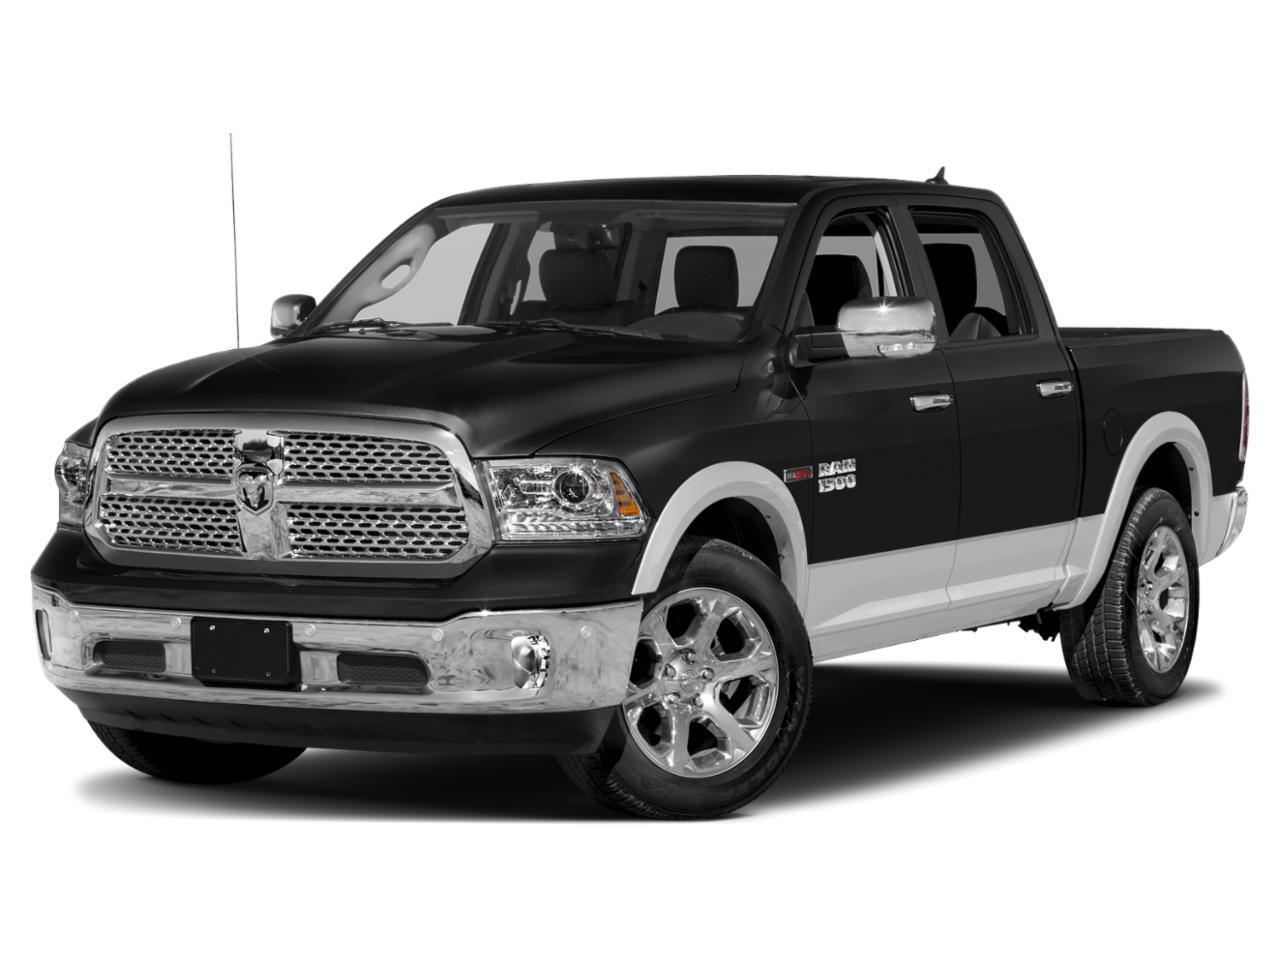 2018 Ram 1500  LARAMIE IN BLACK EQUIPPED WITH A 3.0L ECODIESEL V